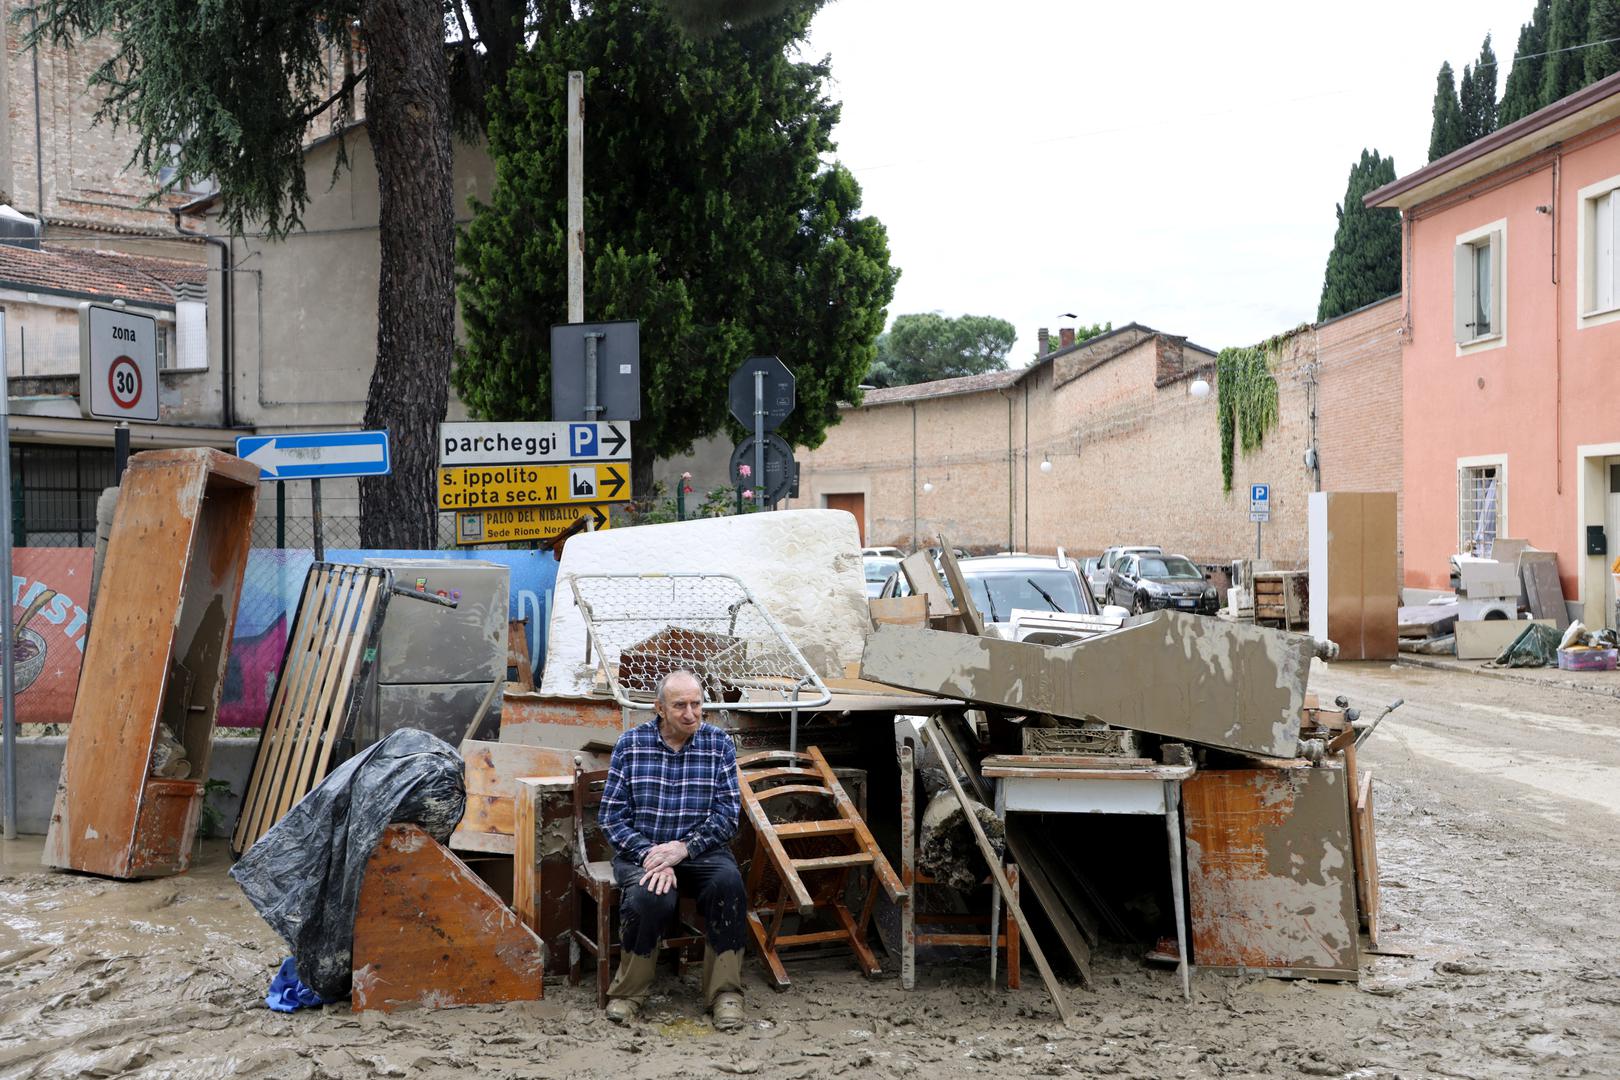 A man sits next to items displaced by a flood after heavy rains hit Italy's Emilia Romagna region, in Faenza, Italy, May 18, 2023. REUTERS/Claudia Greco     TPX IMAGES OF THE DAY Photo: CLAUDIA GRECO/REUTERS